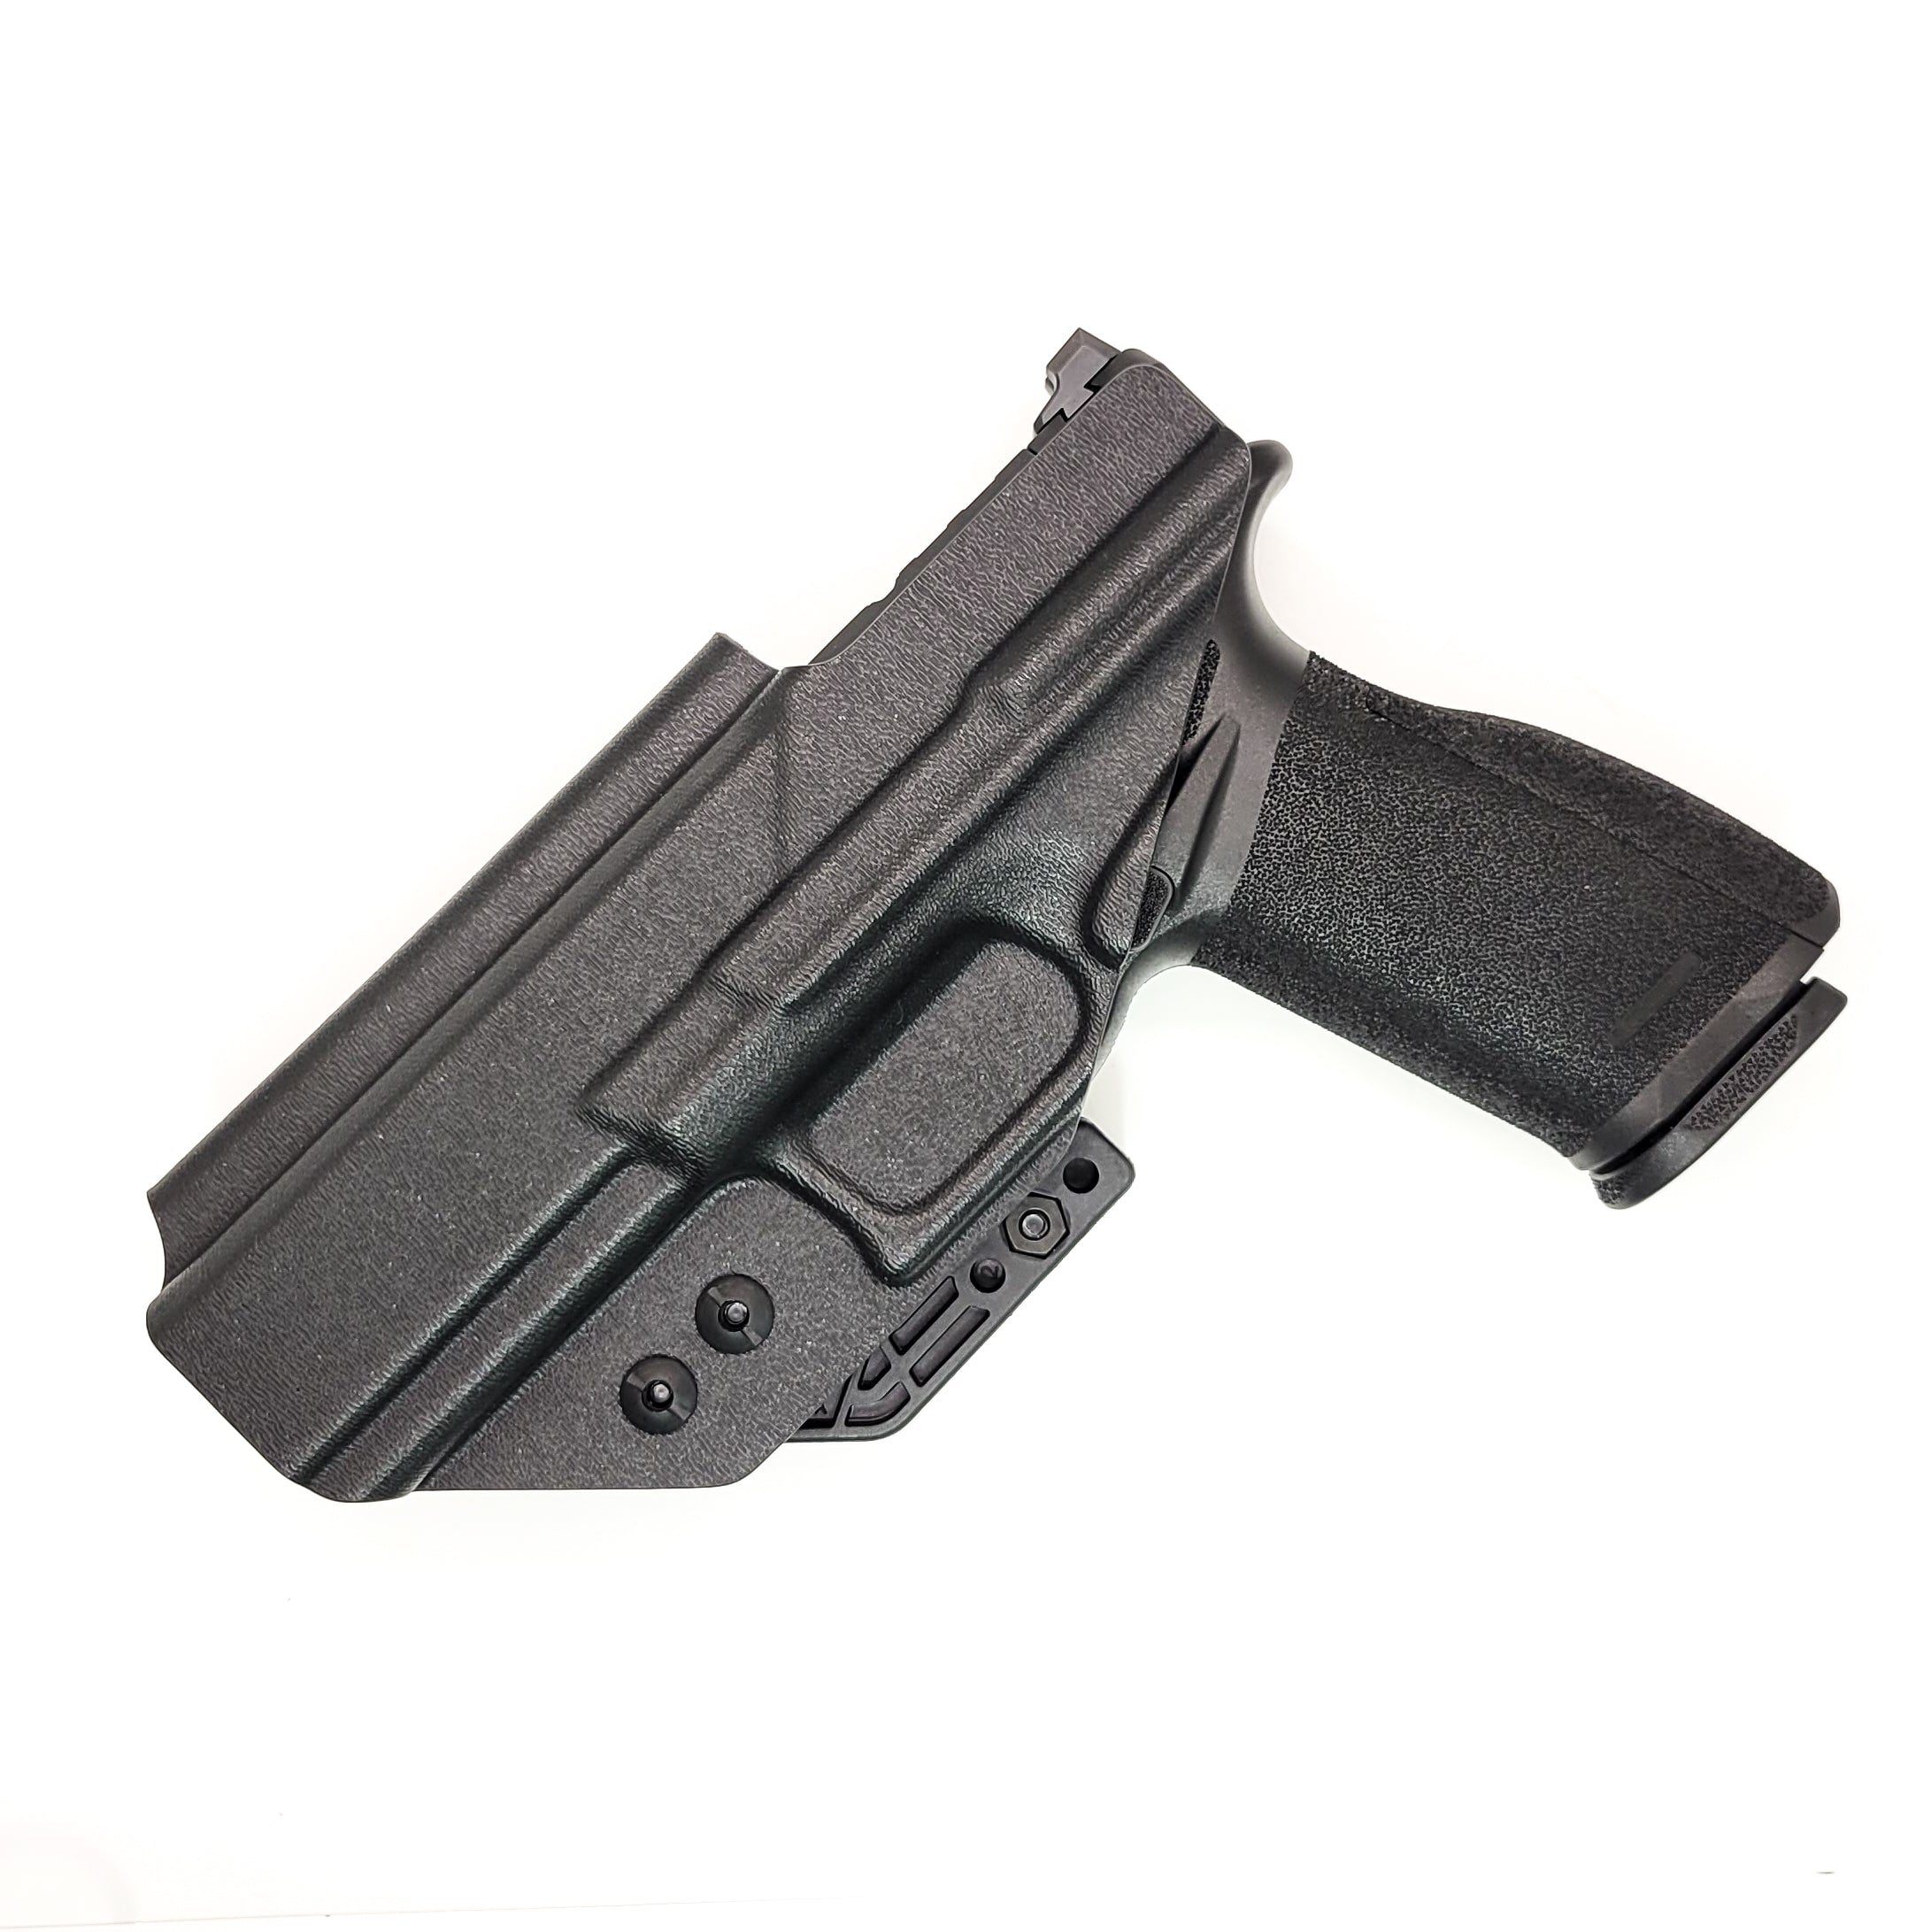 For the best Kydex IWB Inside Waistband Holster designed to fit the Springfield Armory Echelon with or without a red dot sight mounted to the pistol, look to Four Brothers.  Full sweat guard, adjustable retention, minimal material, and smooth edges to reduce printing. Made in the USA by veterans and law enforcement. 